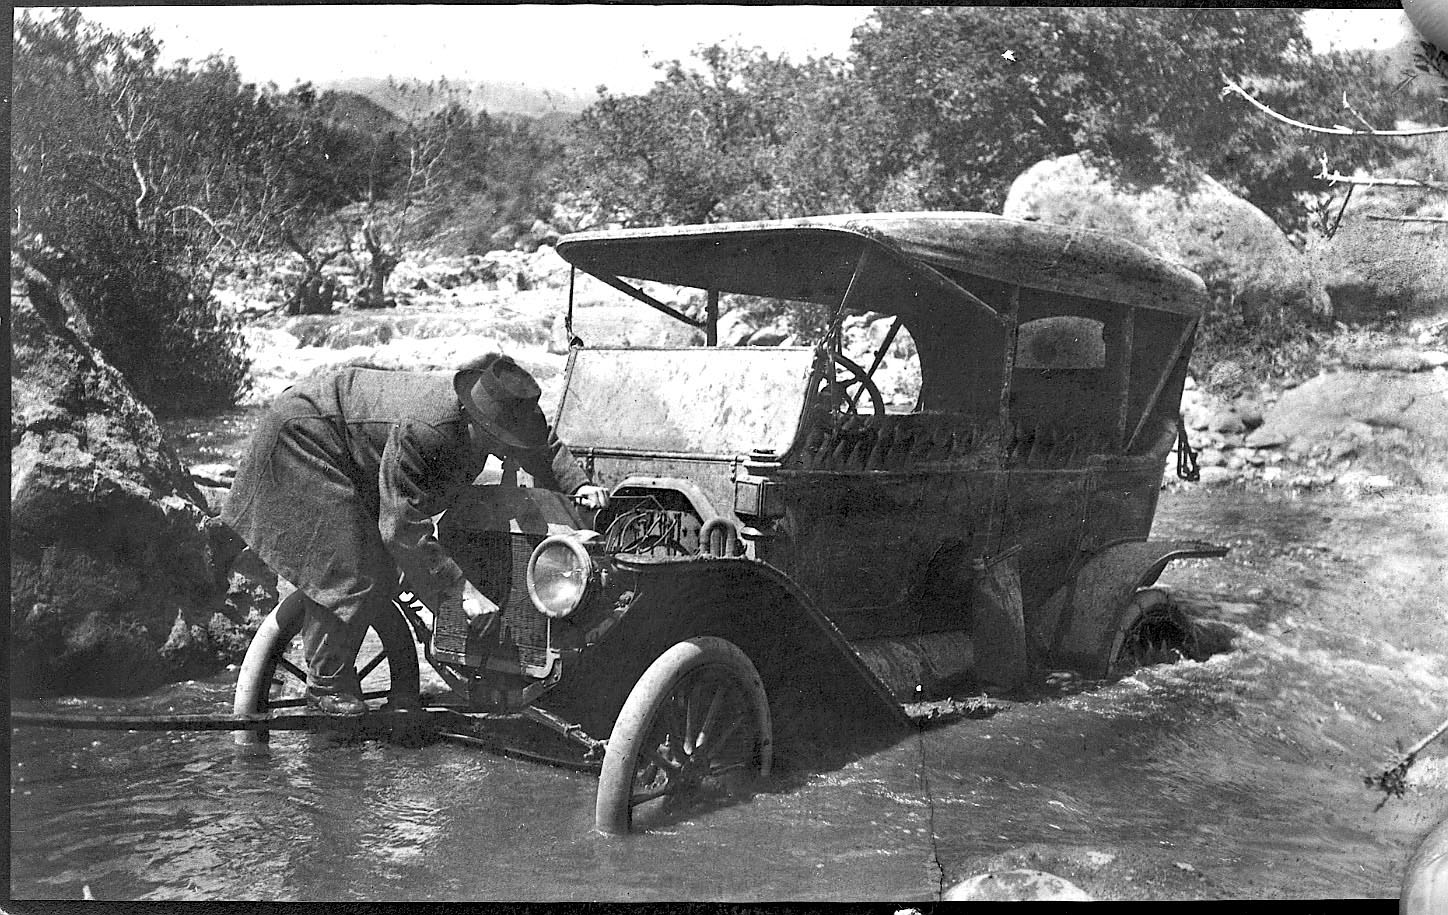 Man trying to get an old car across a stream